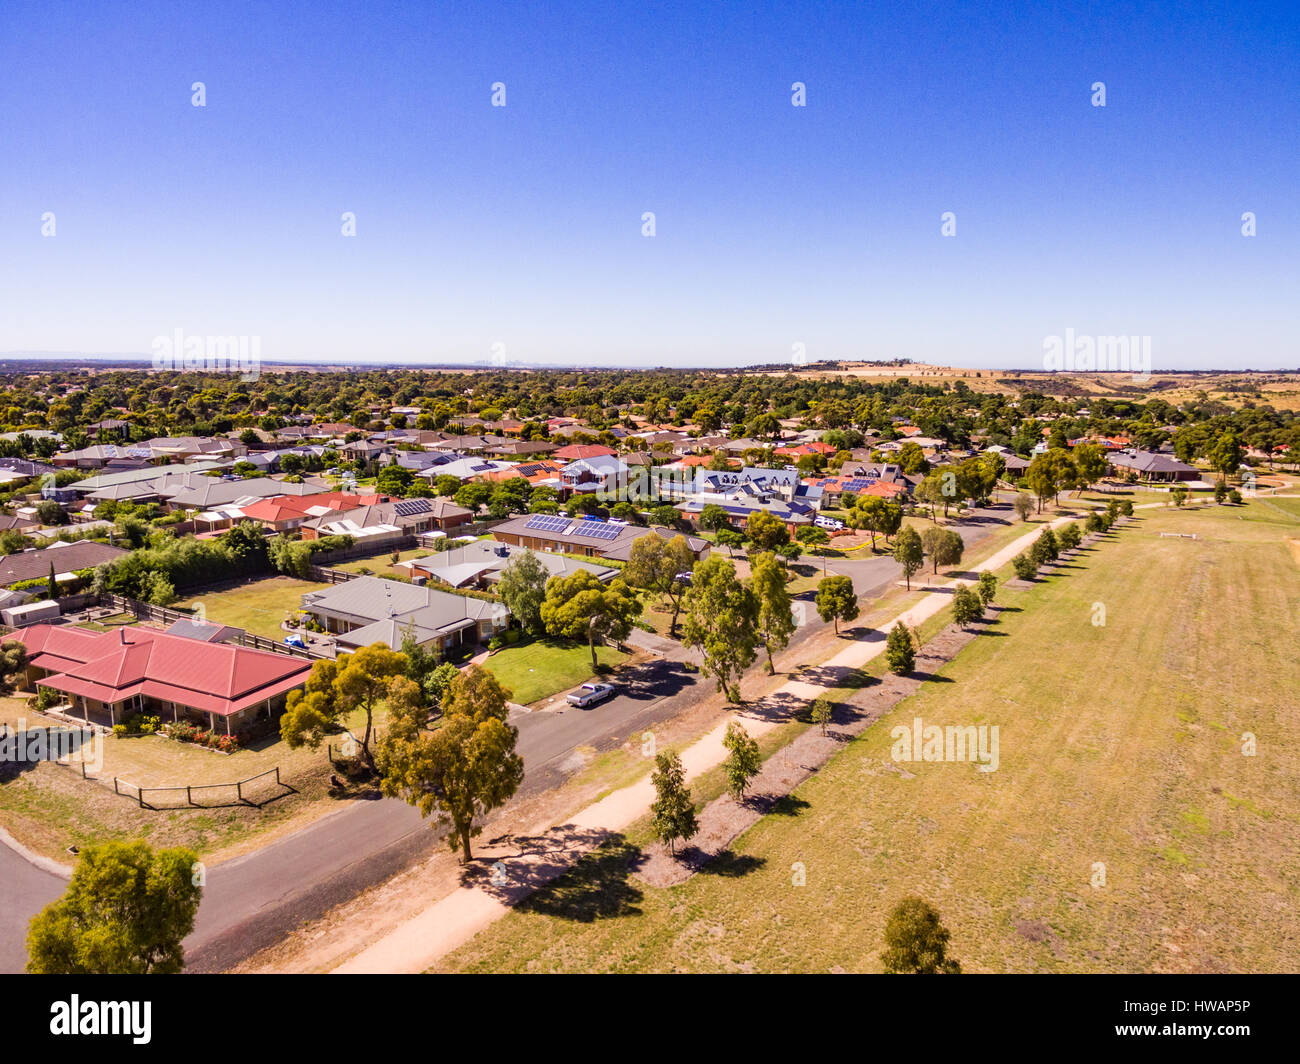 View looking down on residential surburb taken from an Unmanned Aerial Vehicle (UAV), or drone. Stock Photo